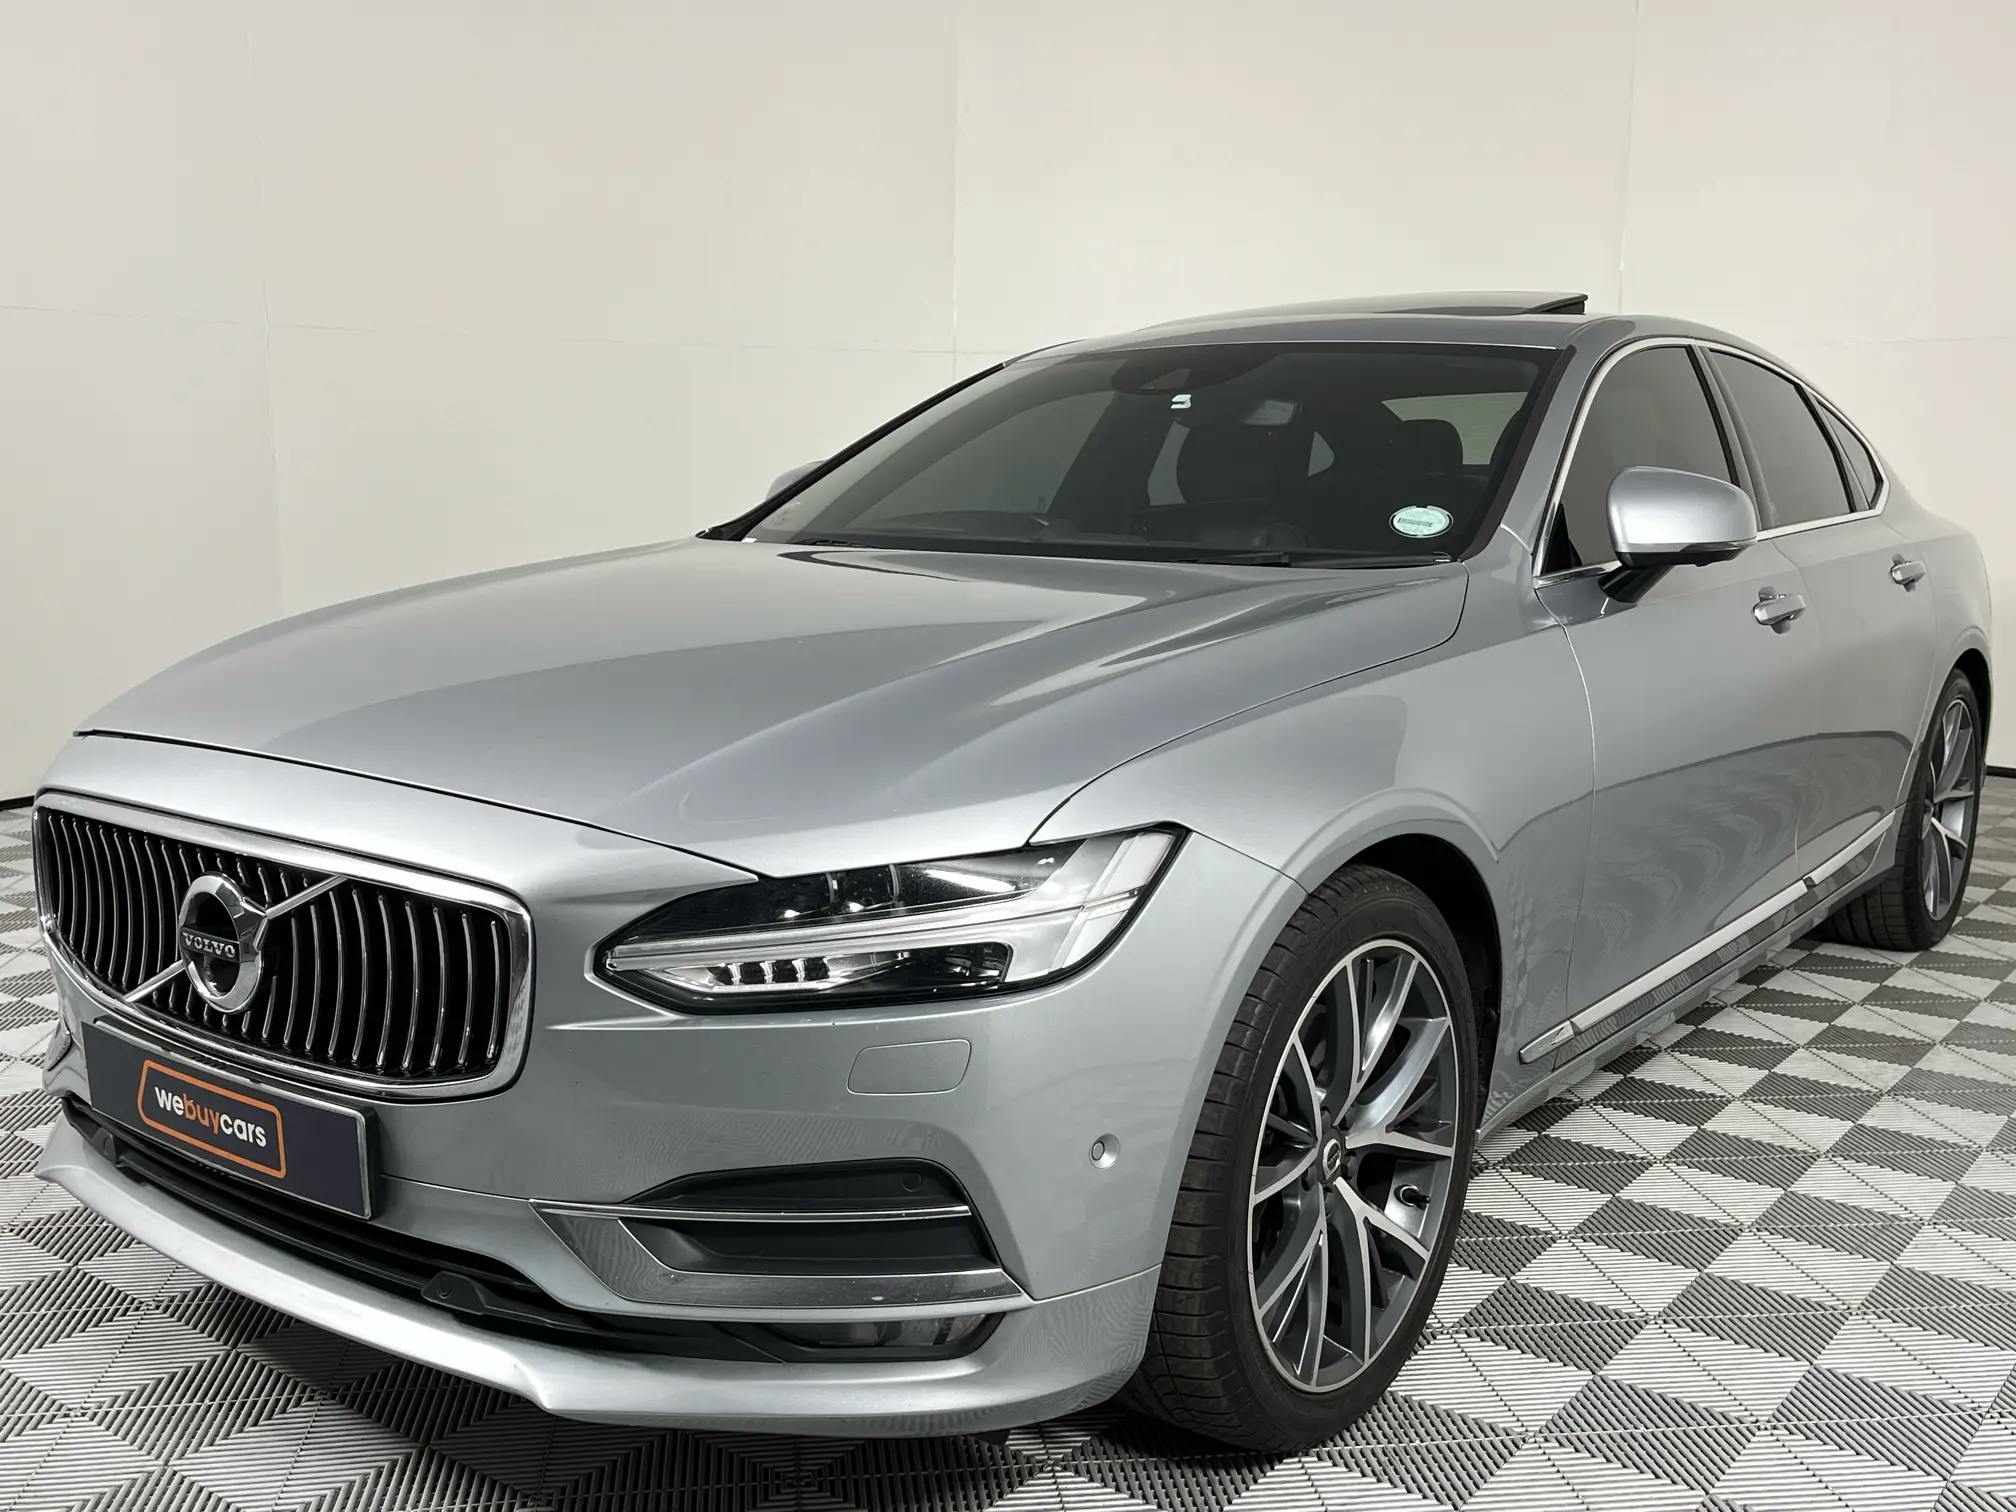 2019 Volvo S90 D5 Inscription Geartronic AWD